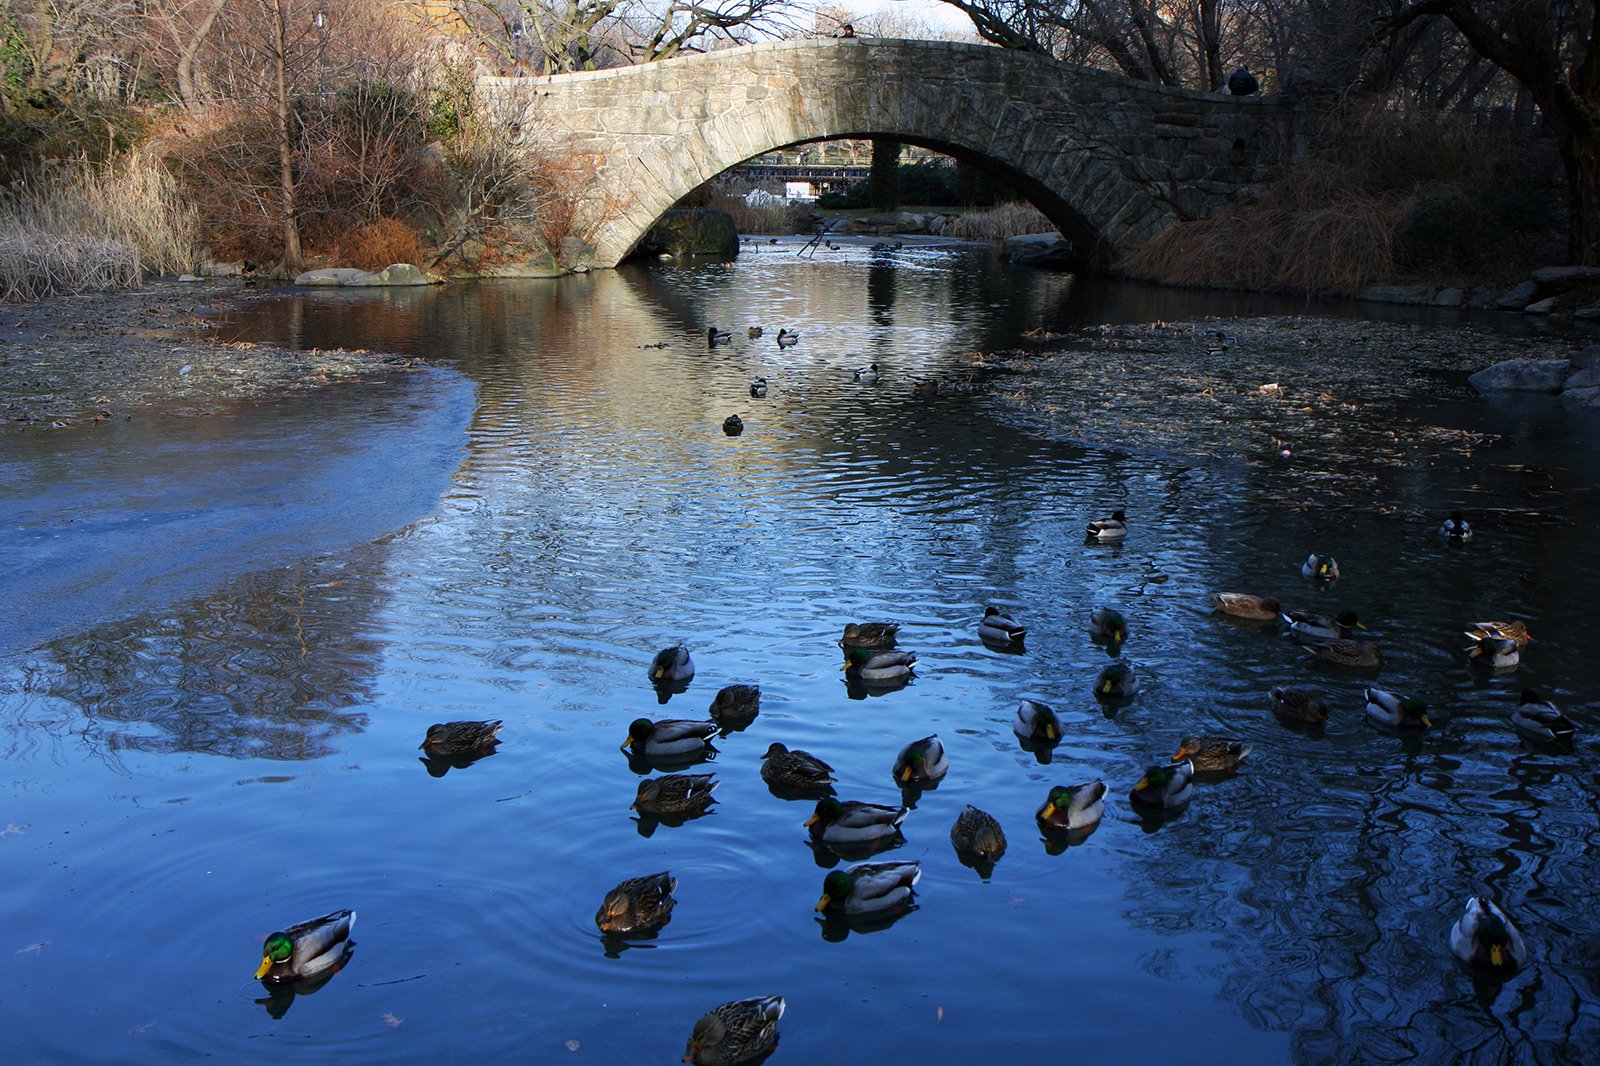 How to feed ducks in Central Park in New York